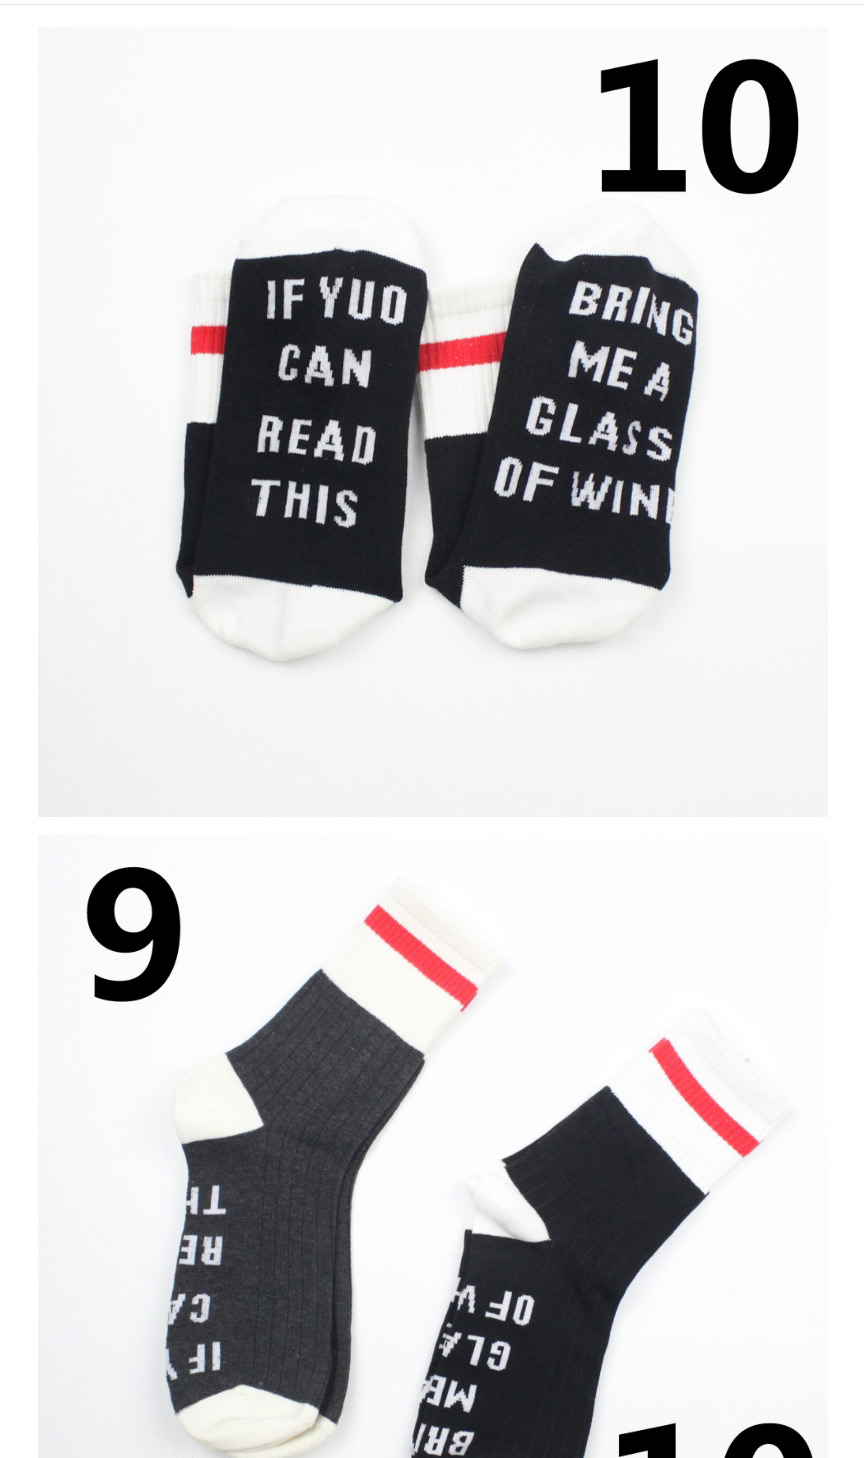 Fashion Black And White Letters On The Sole Of The Foot,Fashion Socks